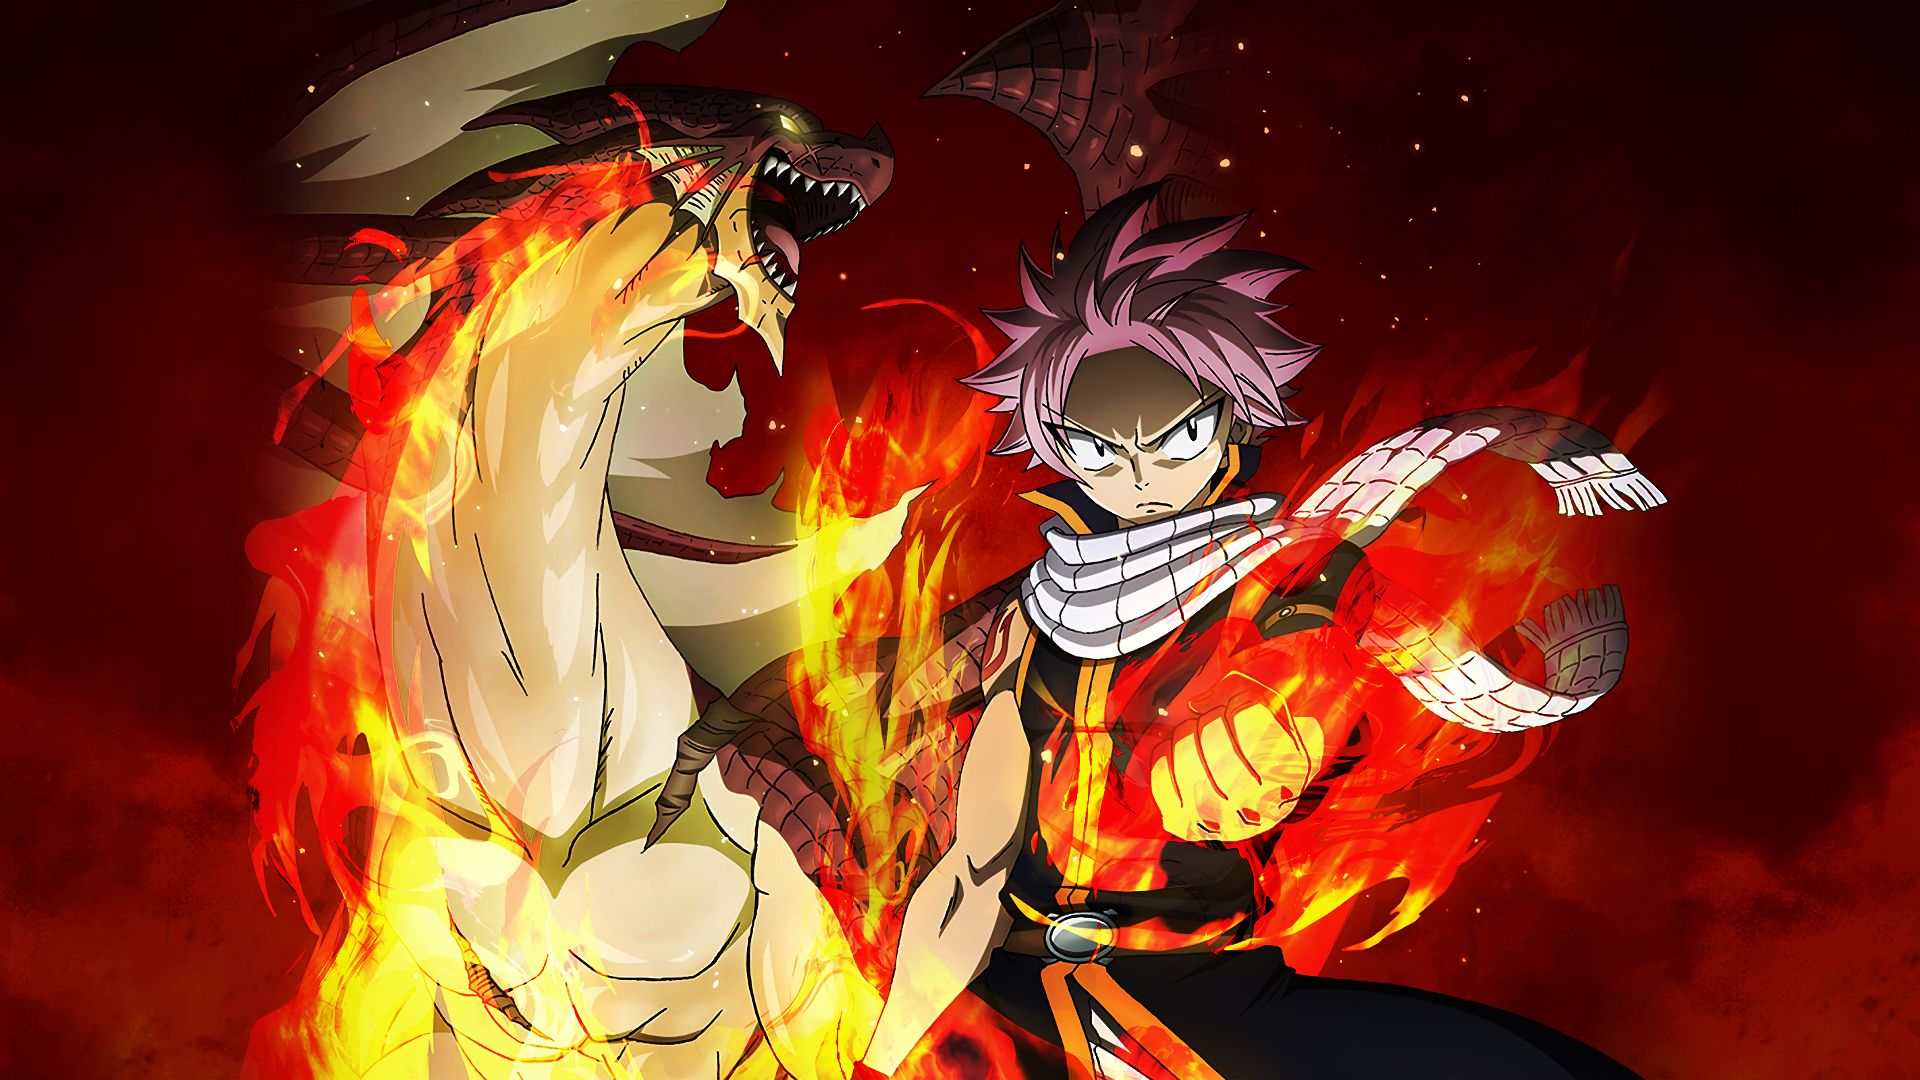 262803 3840x2400 Igneel Fairy Tail  Rare Gallery HD Wallpapers